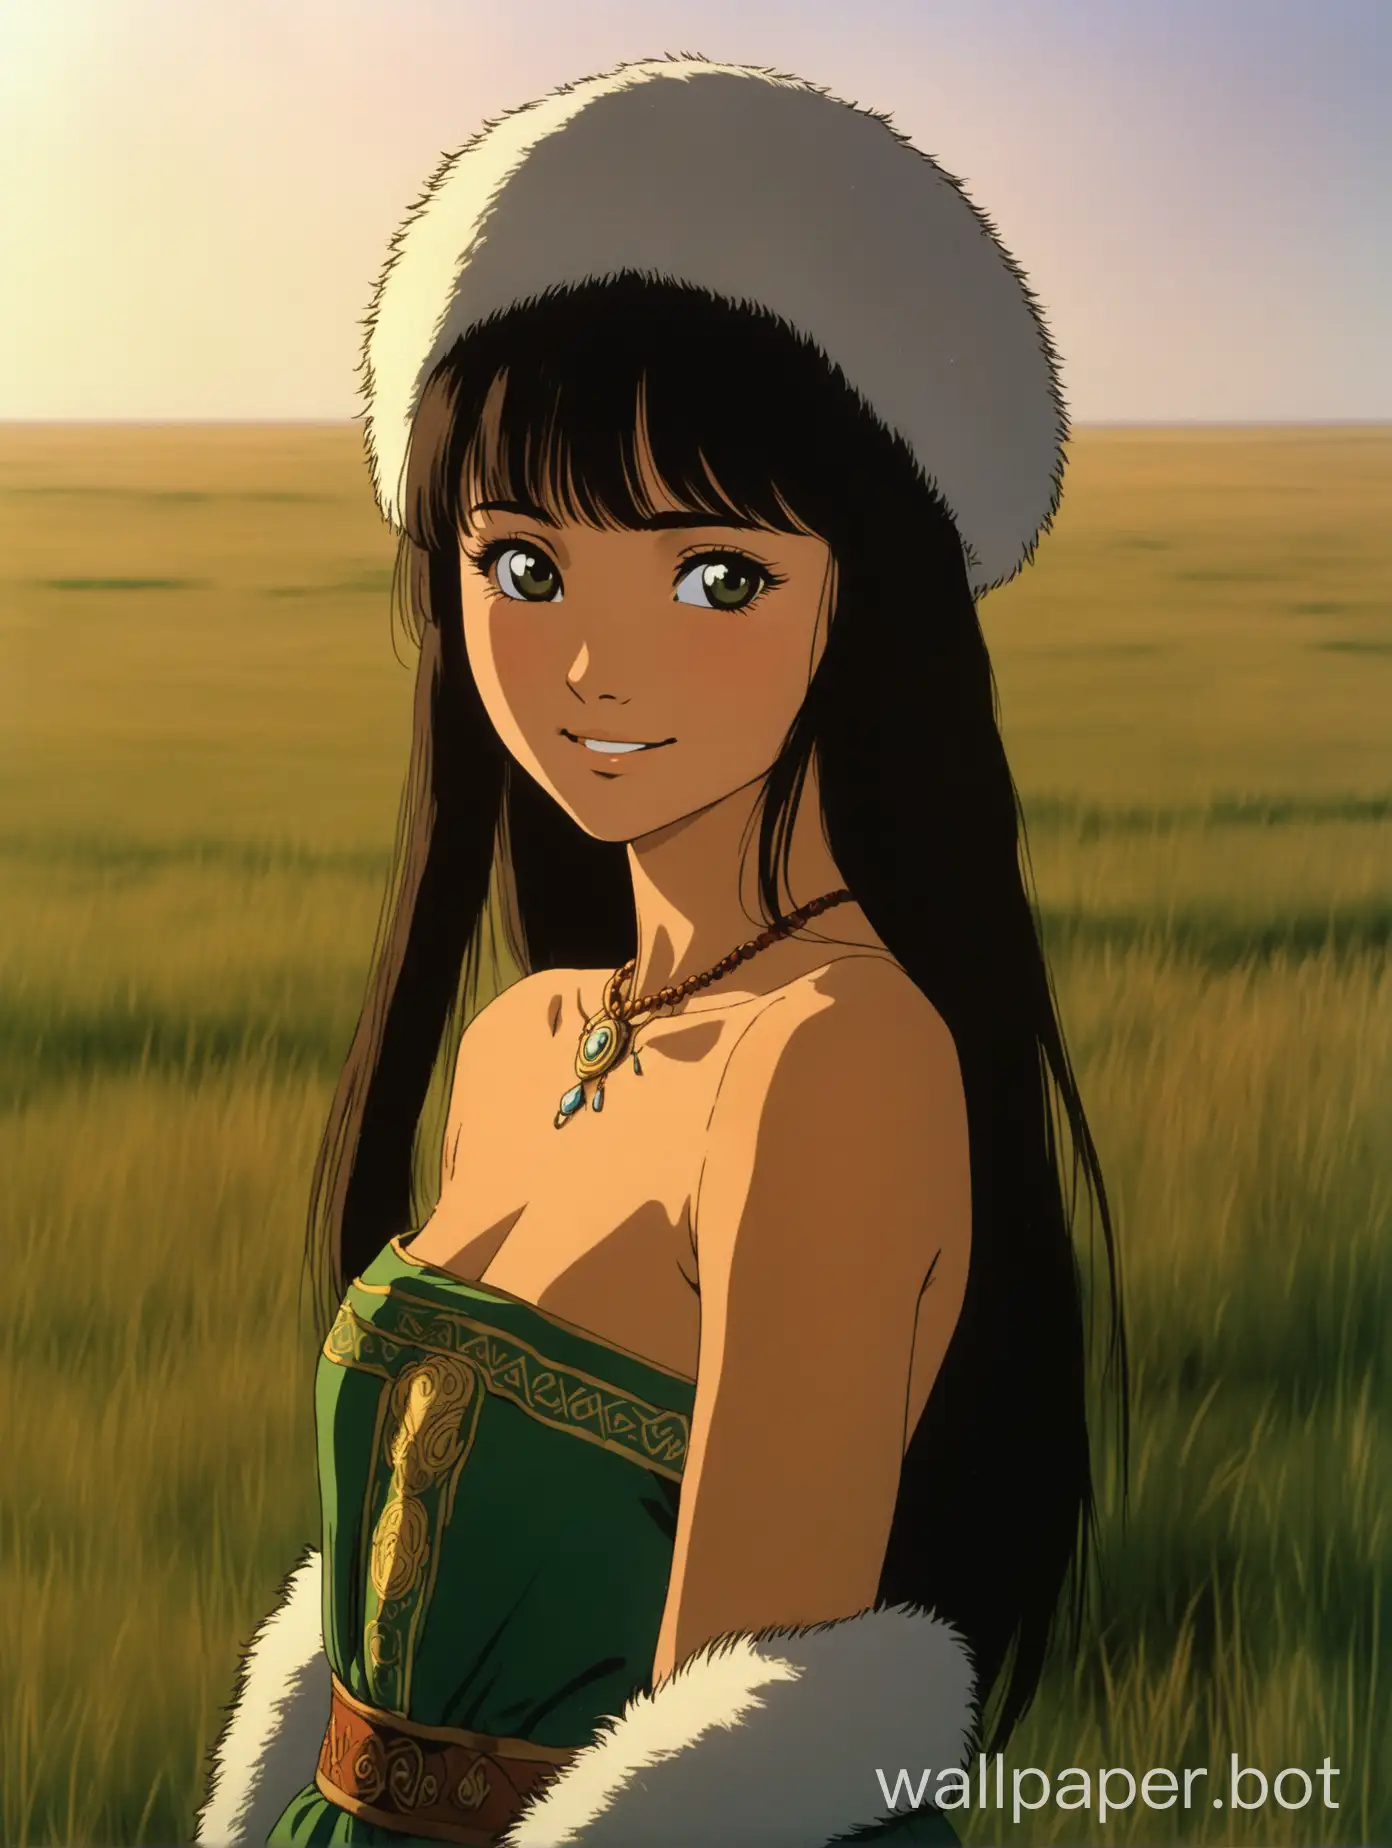 portrait of a gorgeous 18 year old Kazakh woman topless, Turkic, central Asian complexion, steppe, she is very pretty, dark eyes, smiling, sharp face, dignified facial expression, long fluffy black hair, fluffy bangs, topless, wearing a long dark green skirt, wearing a fur-lined cap, medieval, mongolic, supermodel, 1980s retro anime, golden hour